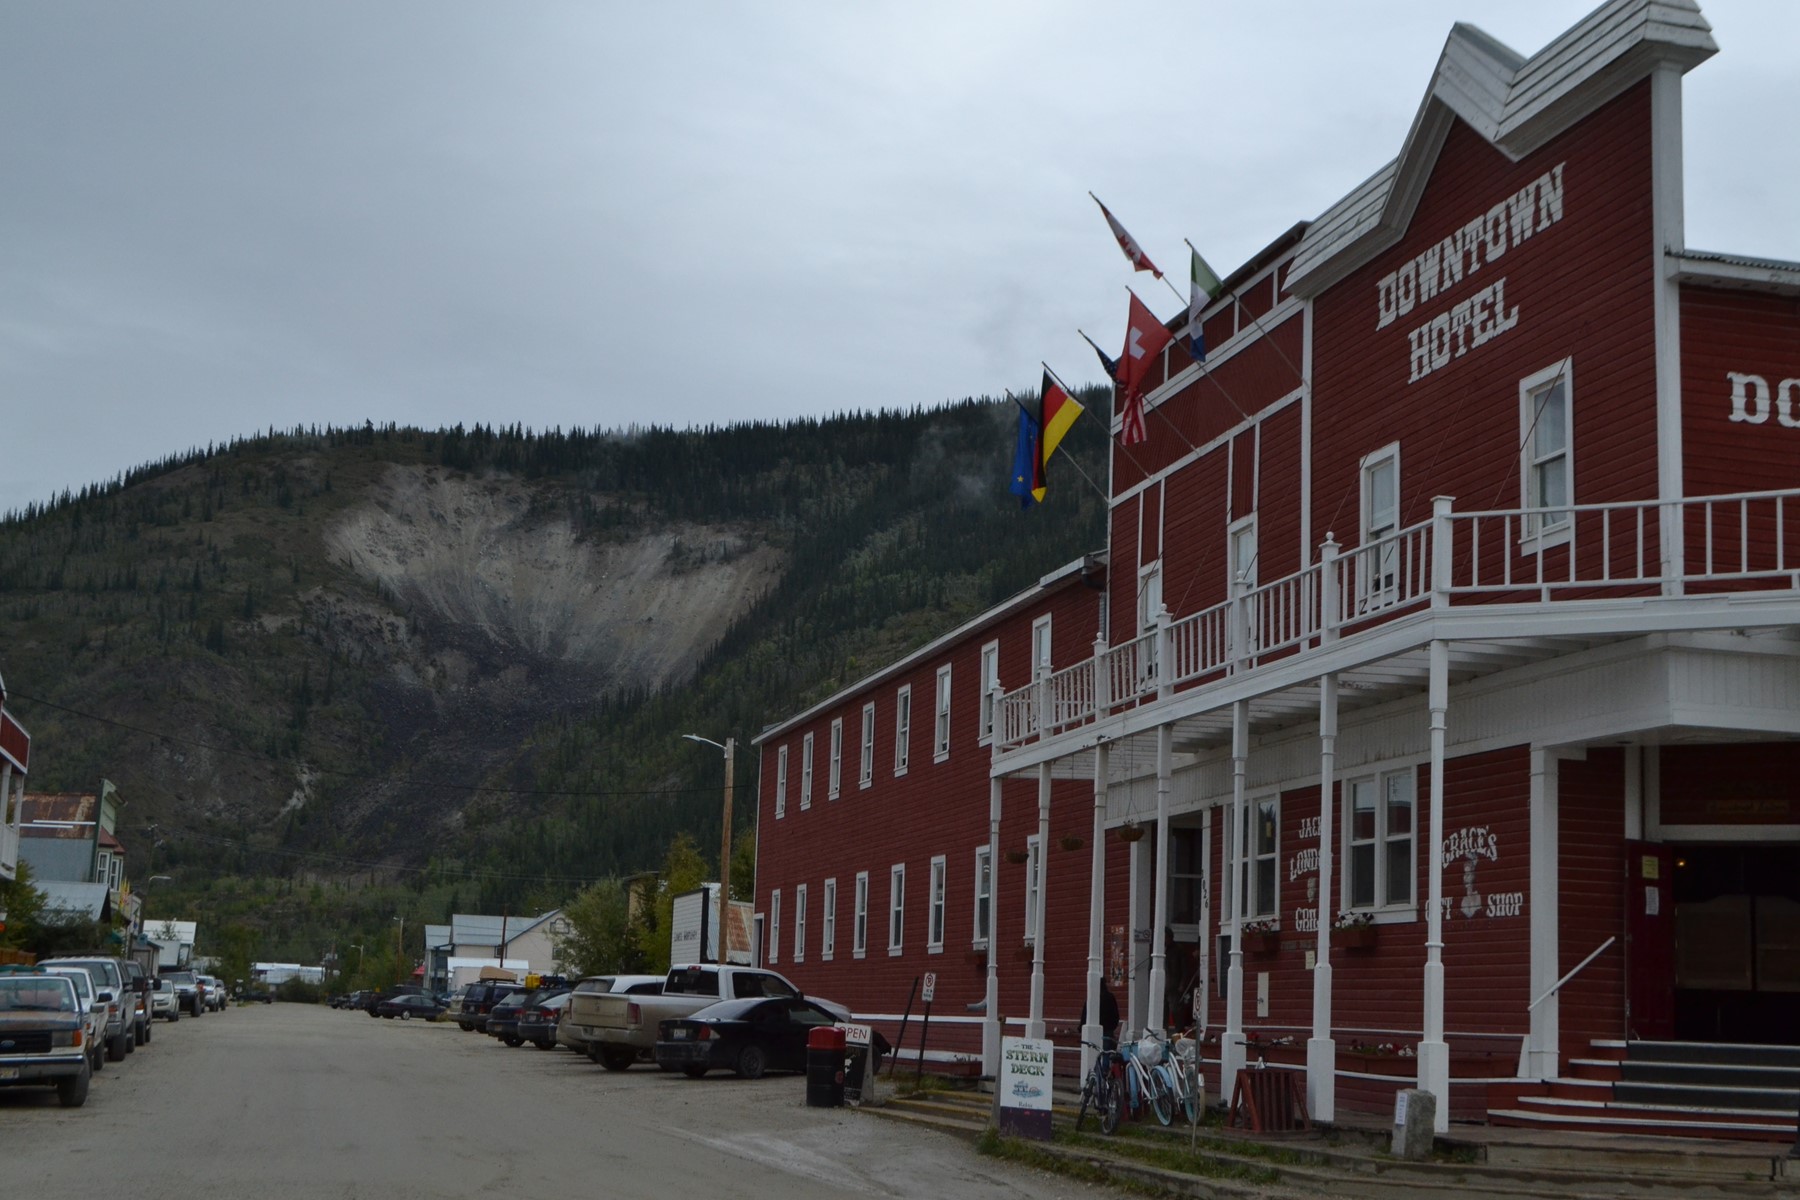 Front fascade of older style hotel with foothills in background